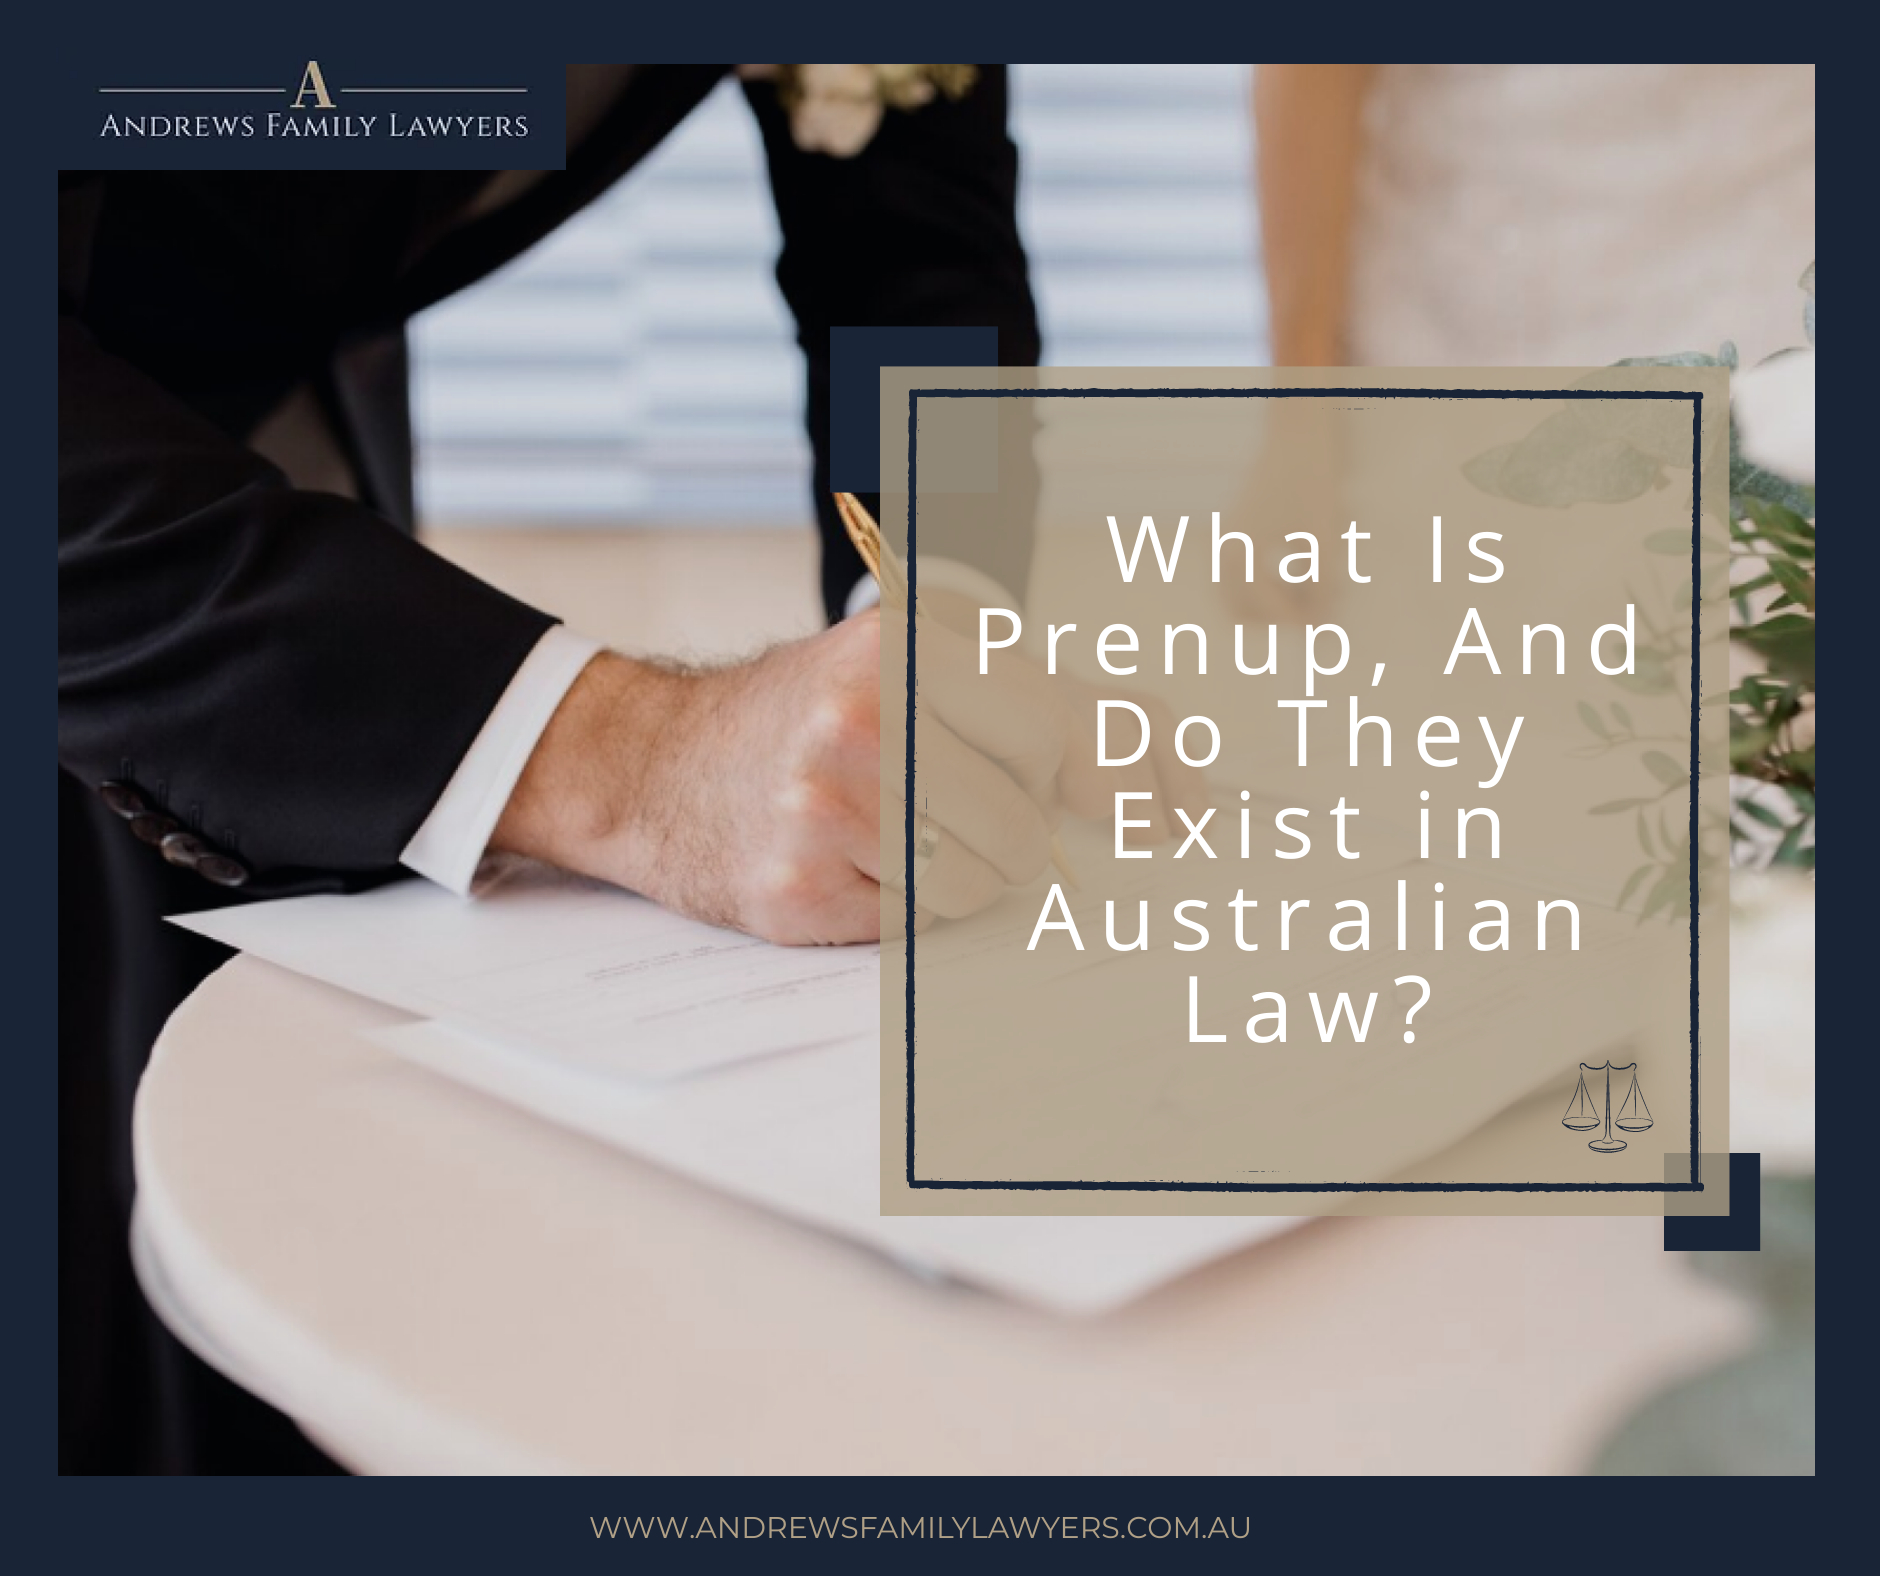 What Is Prenup, And Do They Exist in Australian Law?